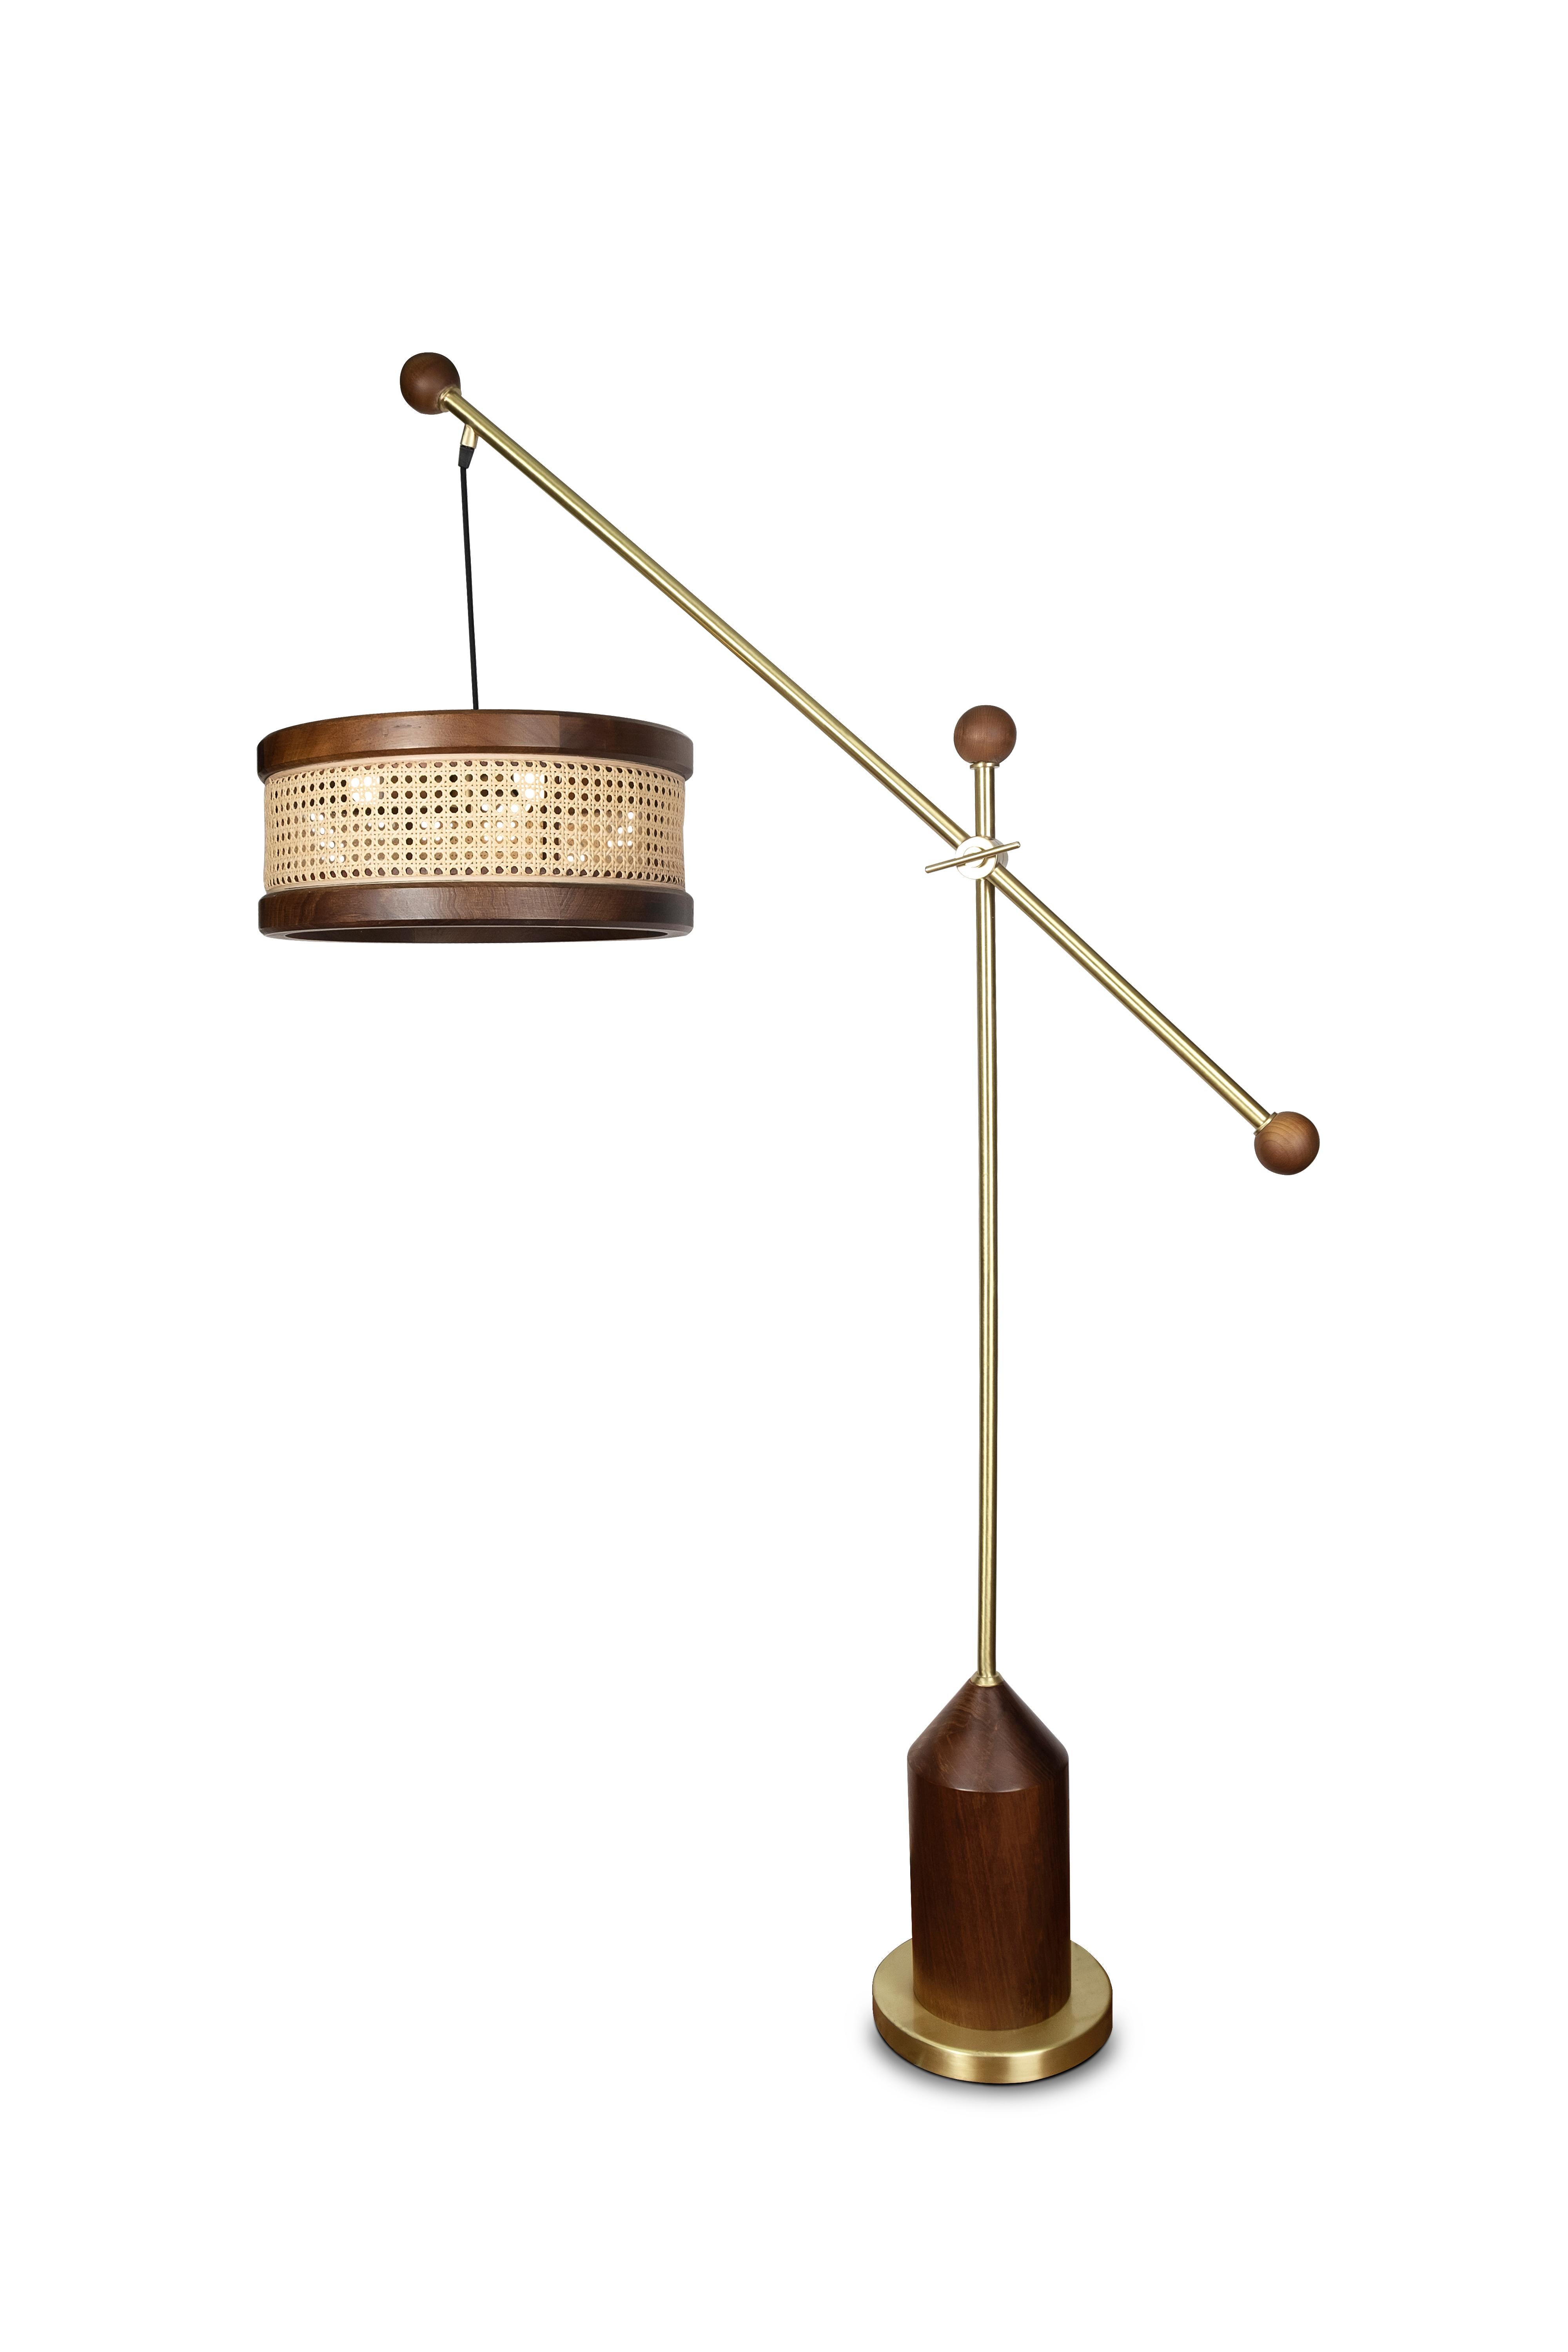 21st Century Rattan Hamilton Floor Lamp Walnut Wood Brass In New Condition For Sale In RIO TINTO, PT